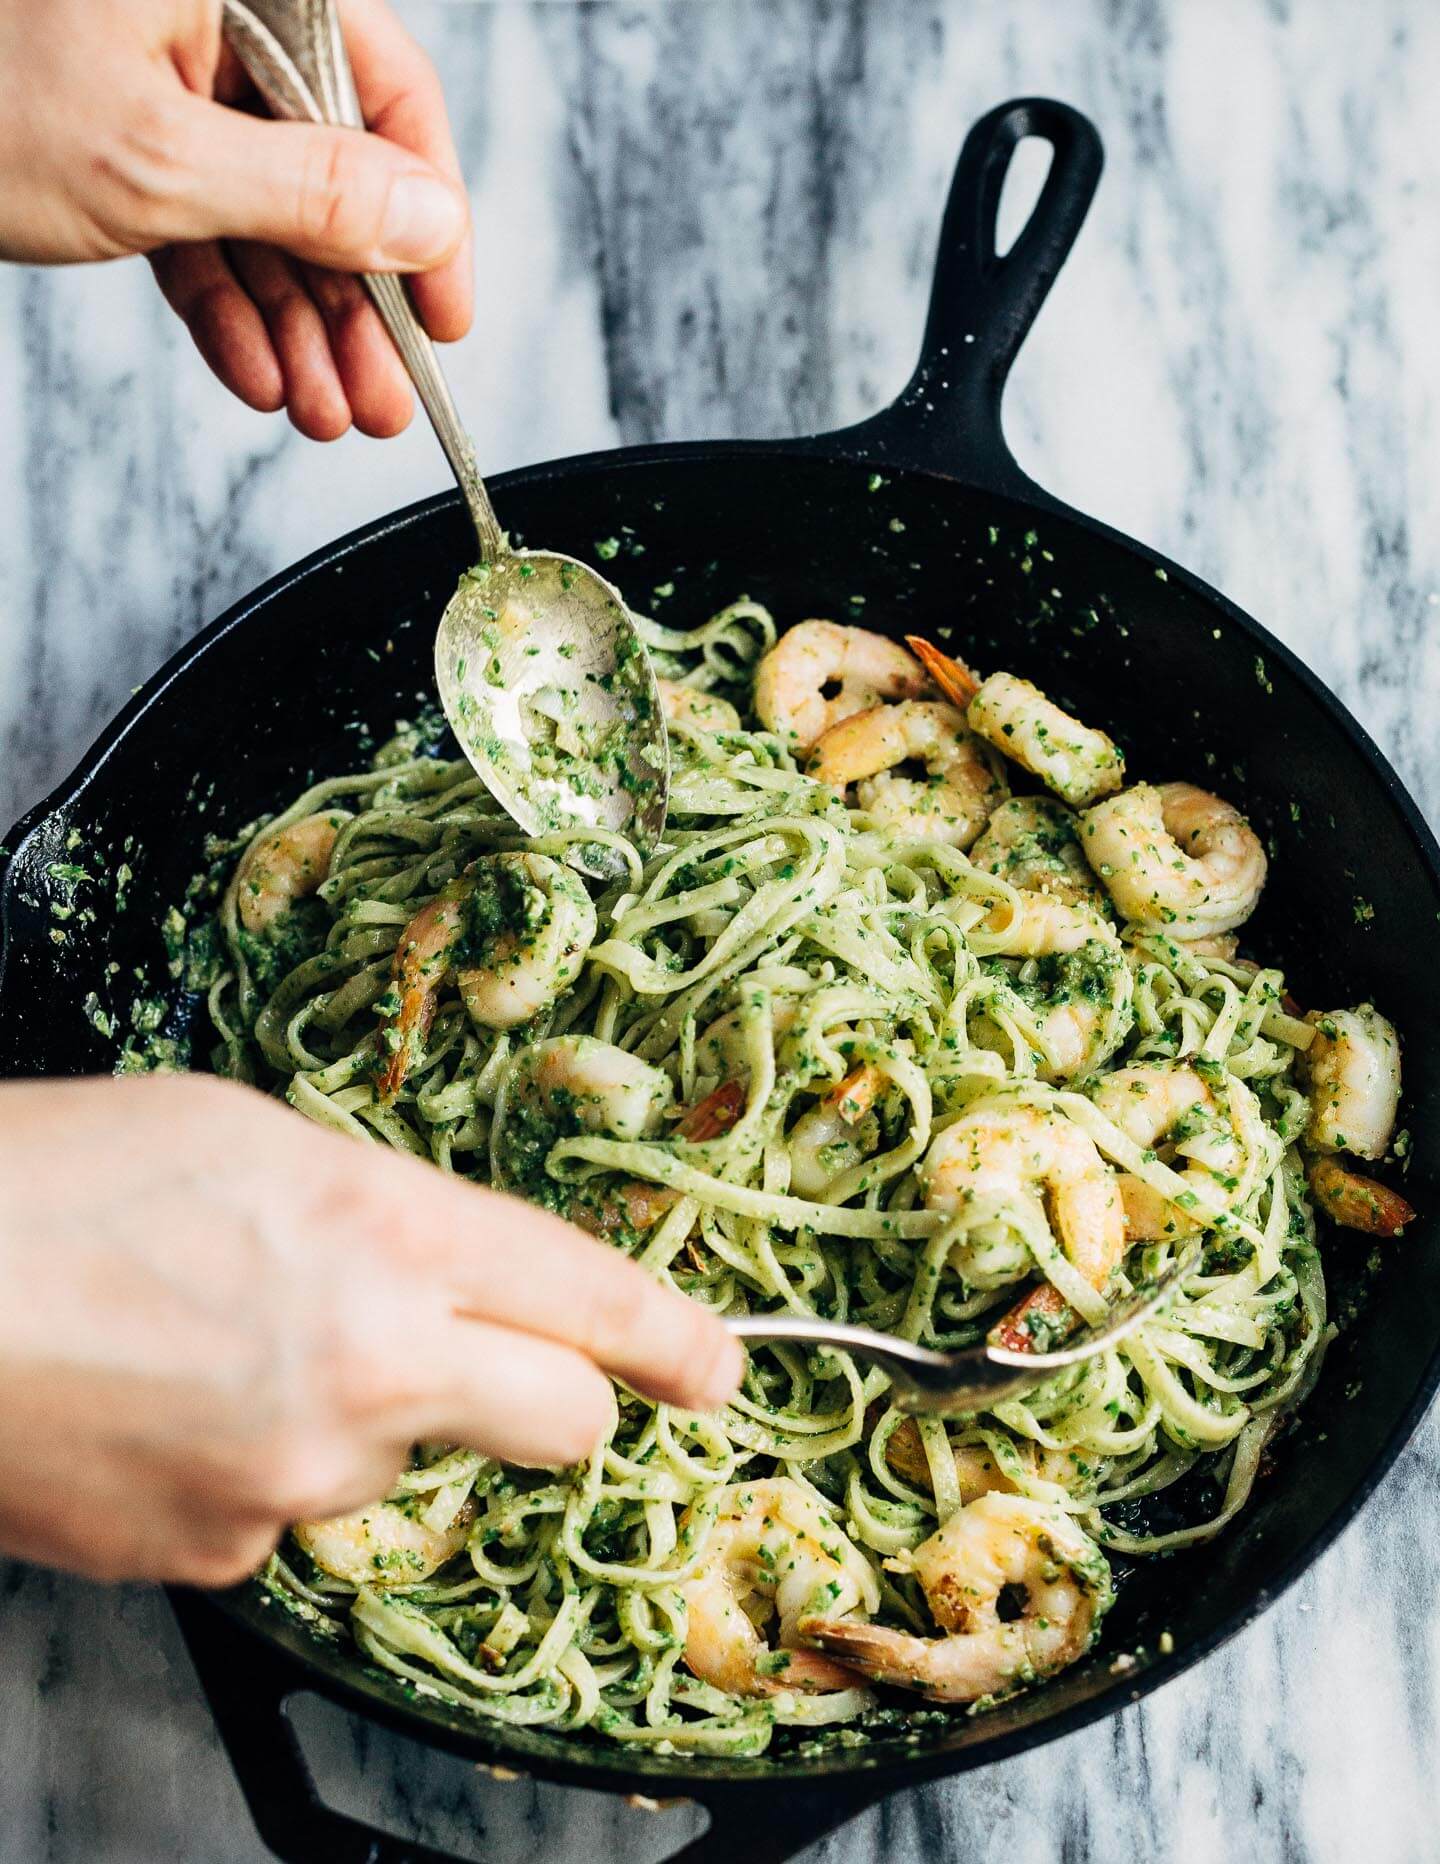 Celebrating the season's first shoots with a vibrant spring onion and chive pesto pasta tossed with sautéed shrimp that's perfect for dinner parties or a quick weeknight meal.